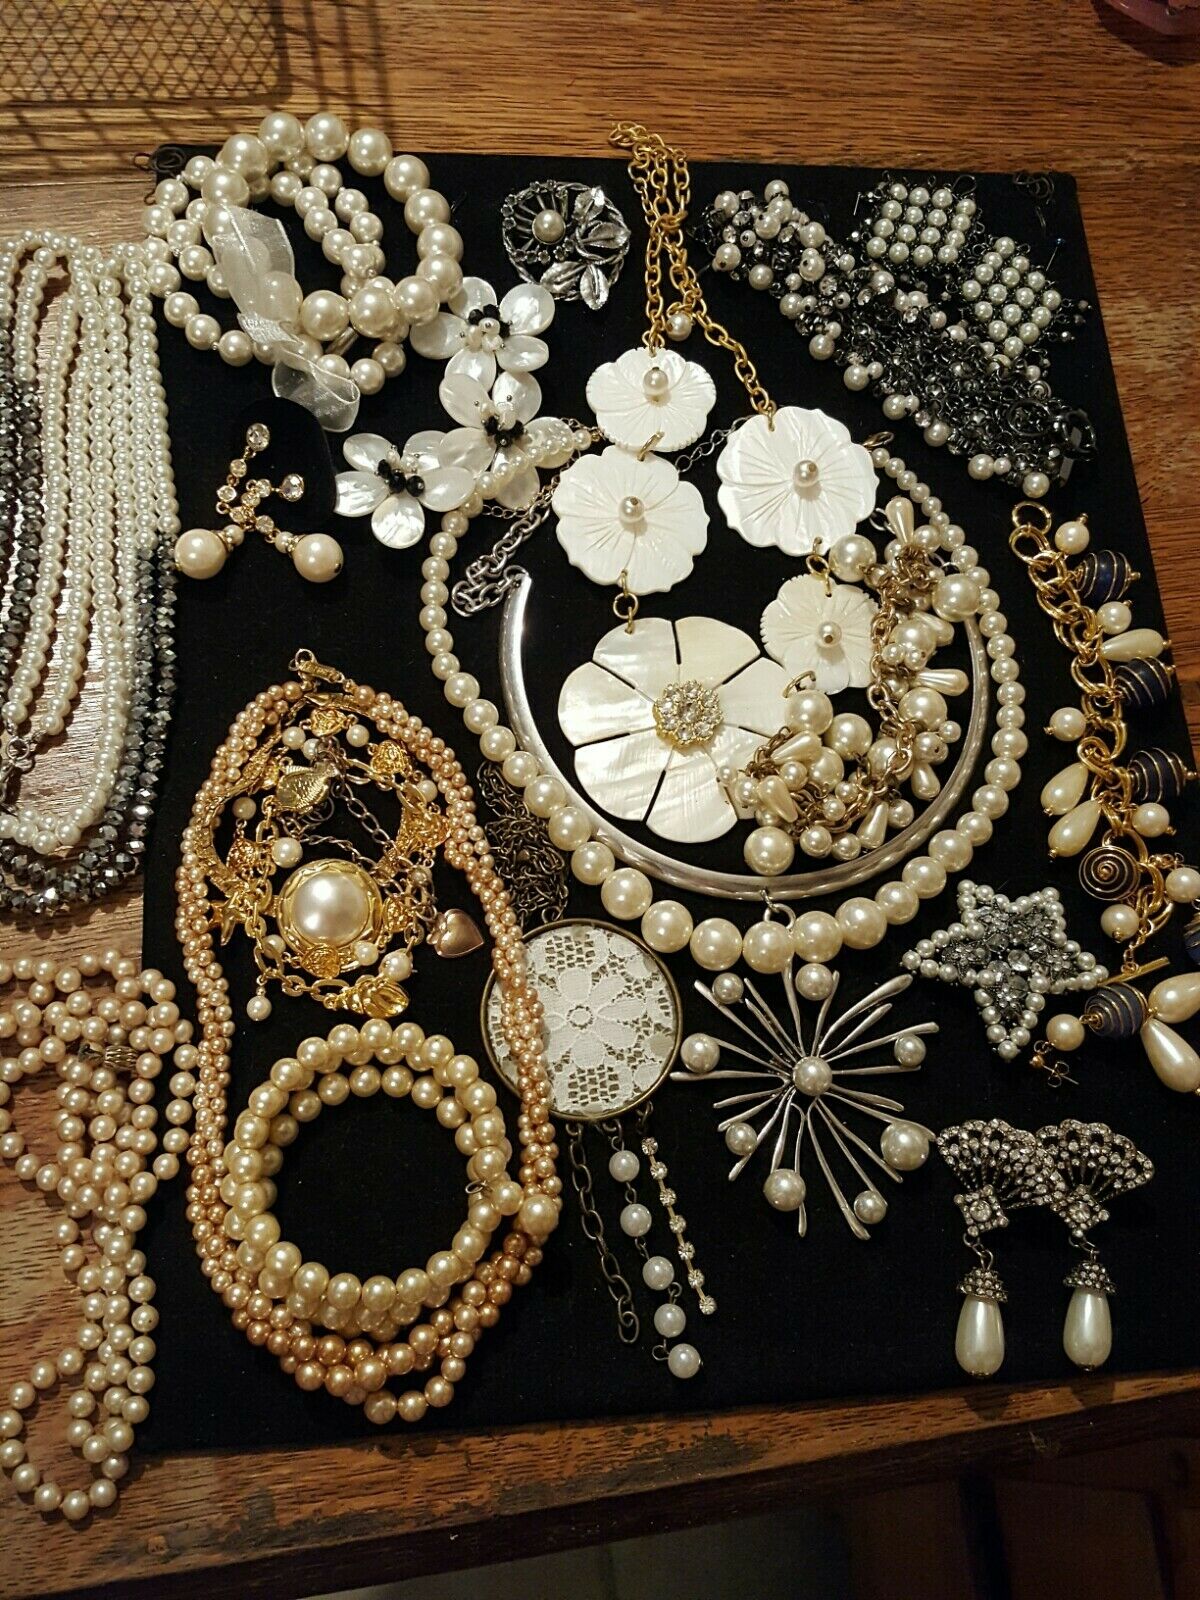 Lot Of Pearl Jewelry, Napier,parkl Rhinestone Eringd Shell Necklace +,look Close